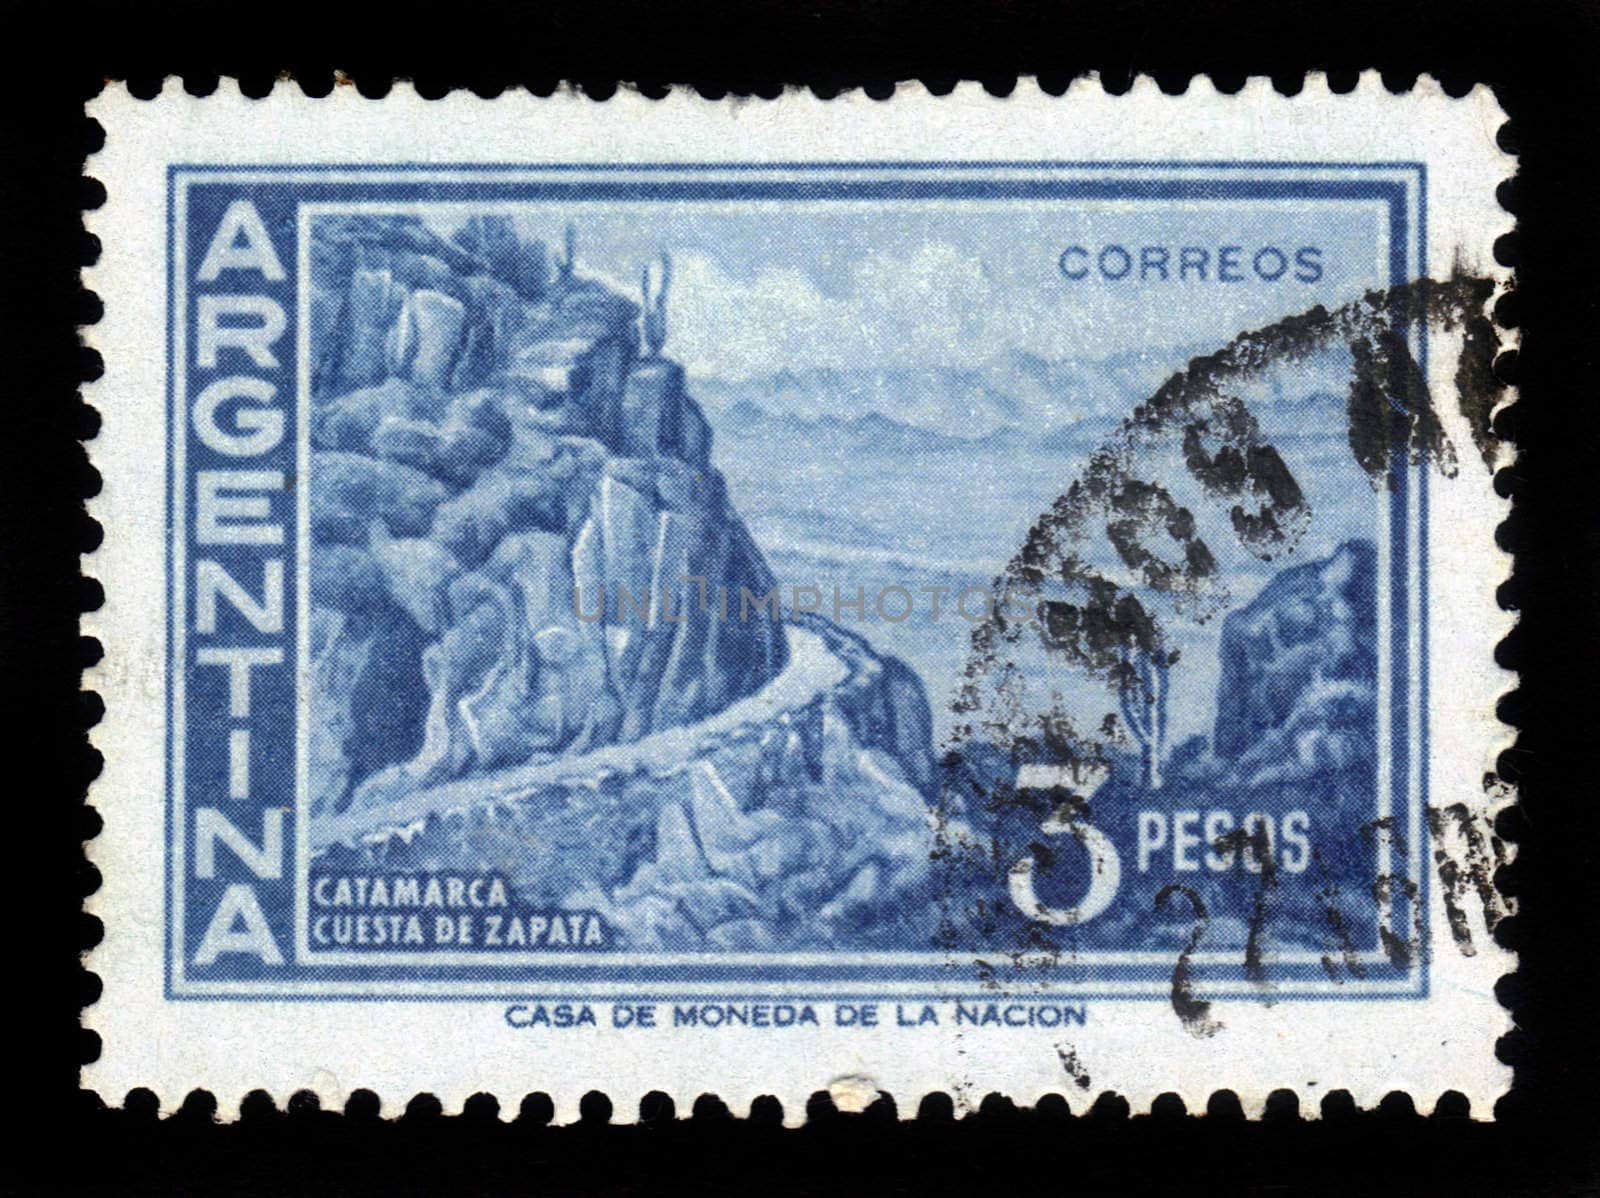 ARGENTINA - CIRCA 1960: A stamp printed in the Argentina, shows landscape of Zapata Slope, Catamarca, circa 1960